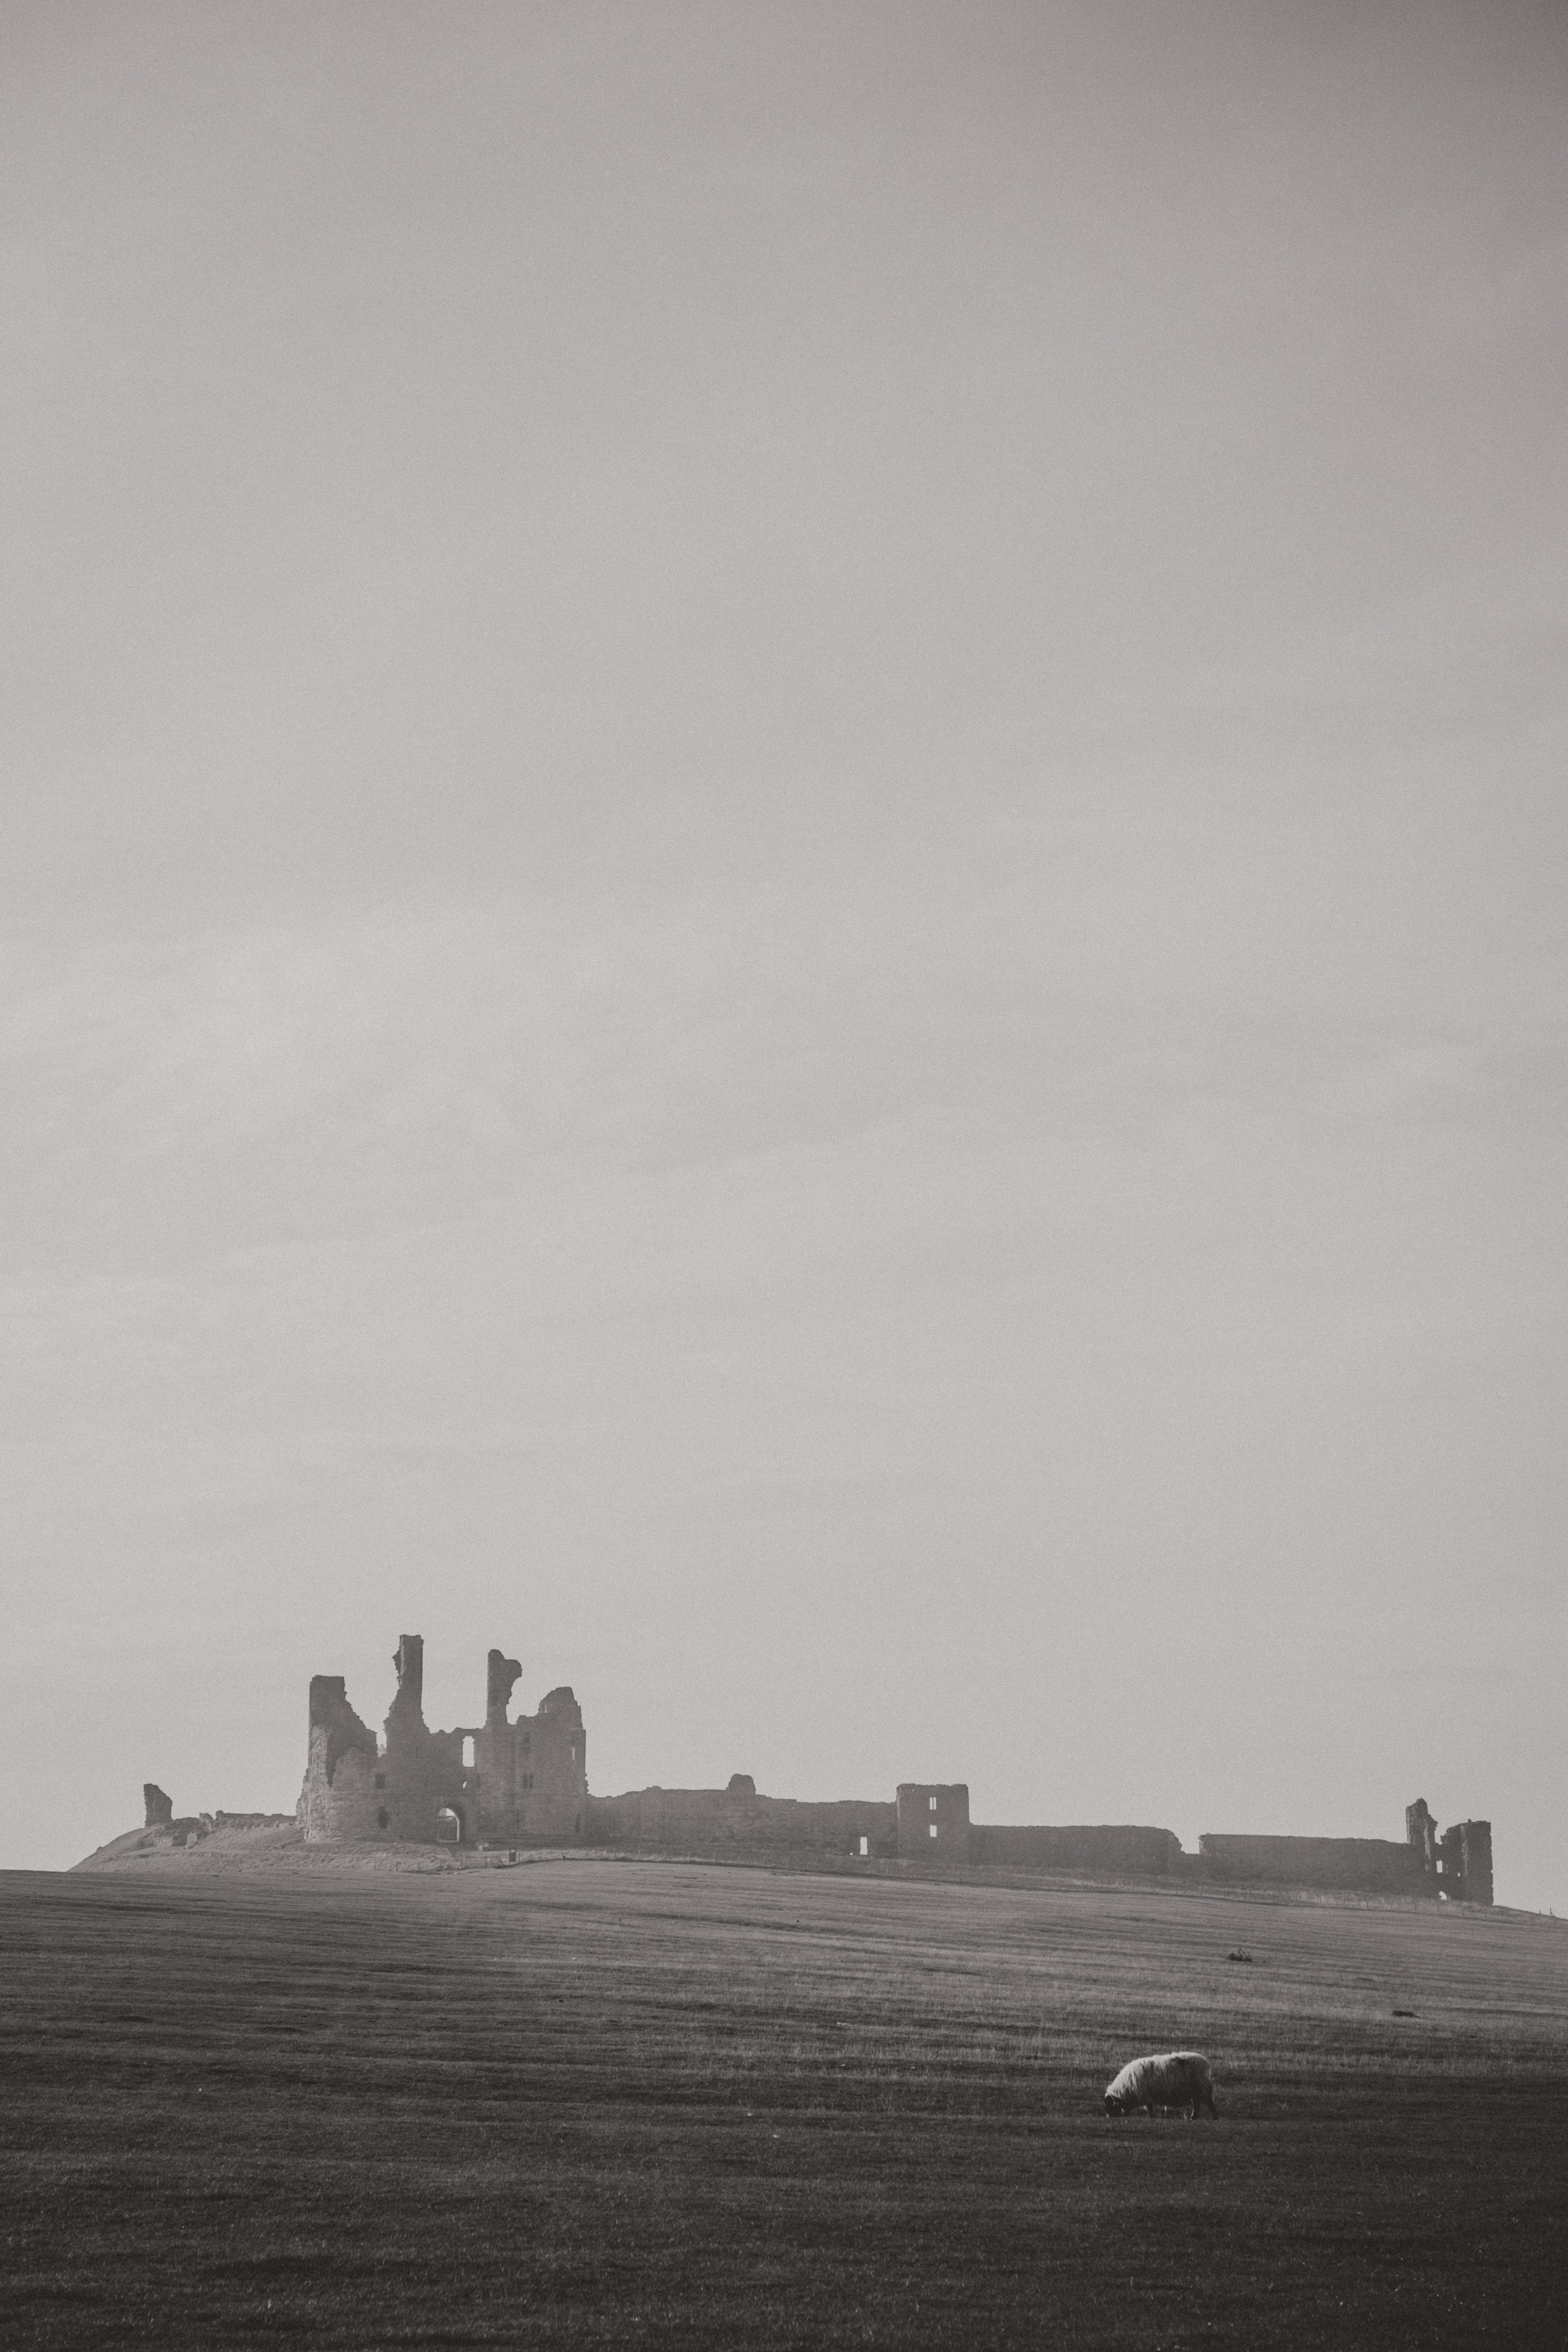 Looking to Dunstanburgh Castle - Notice the Space